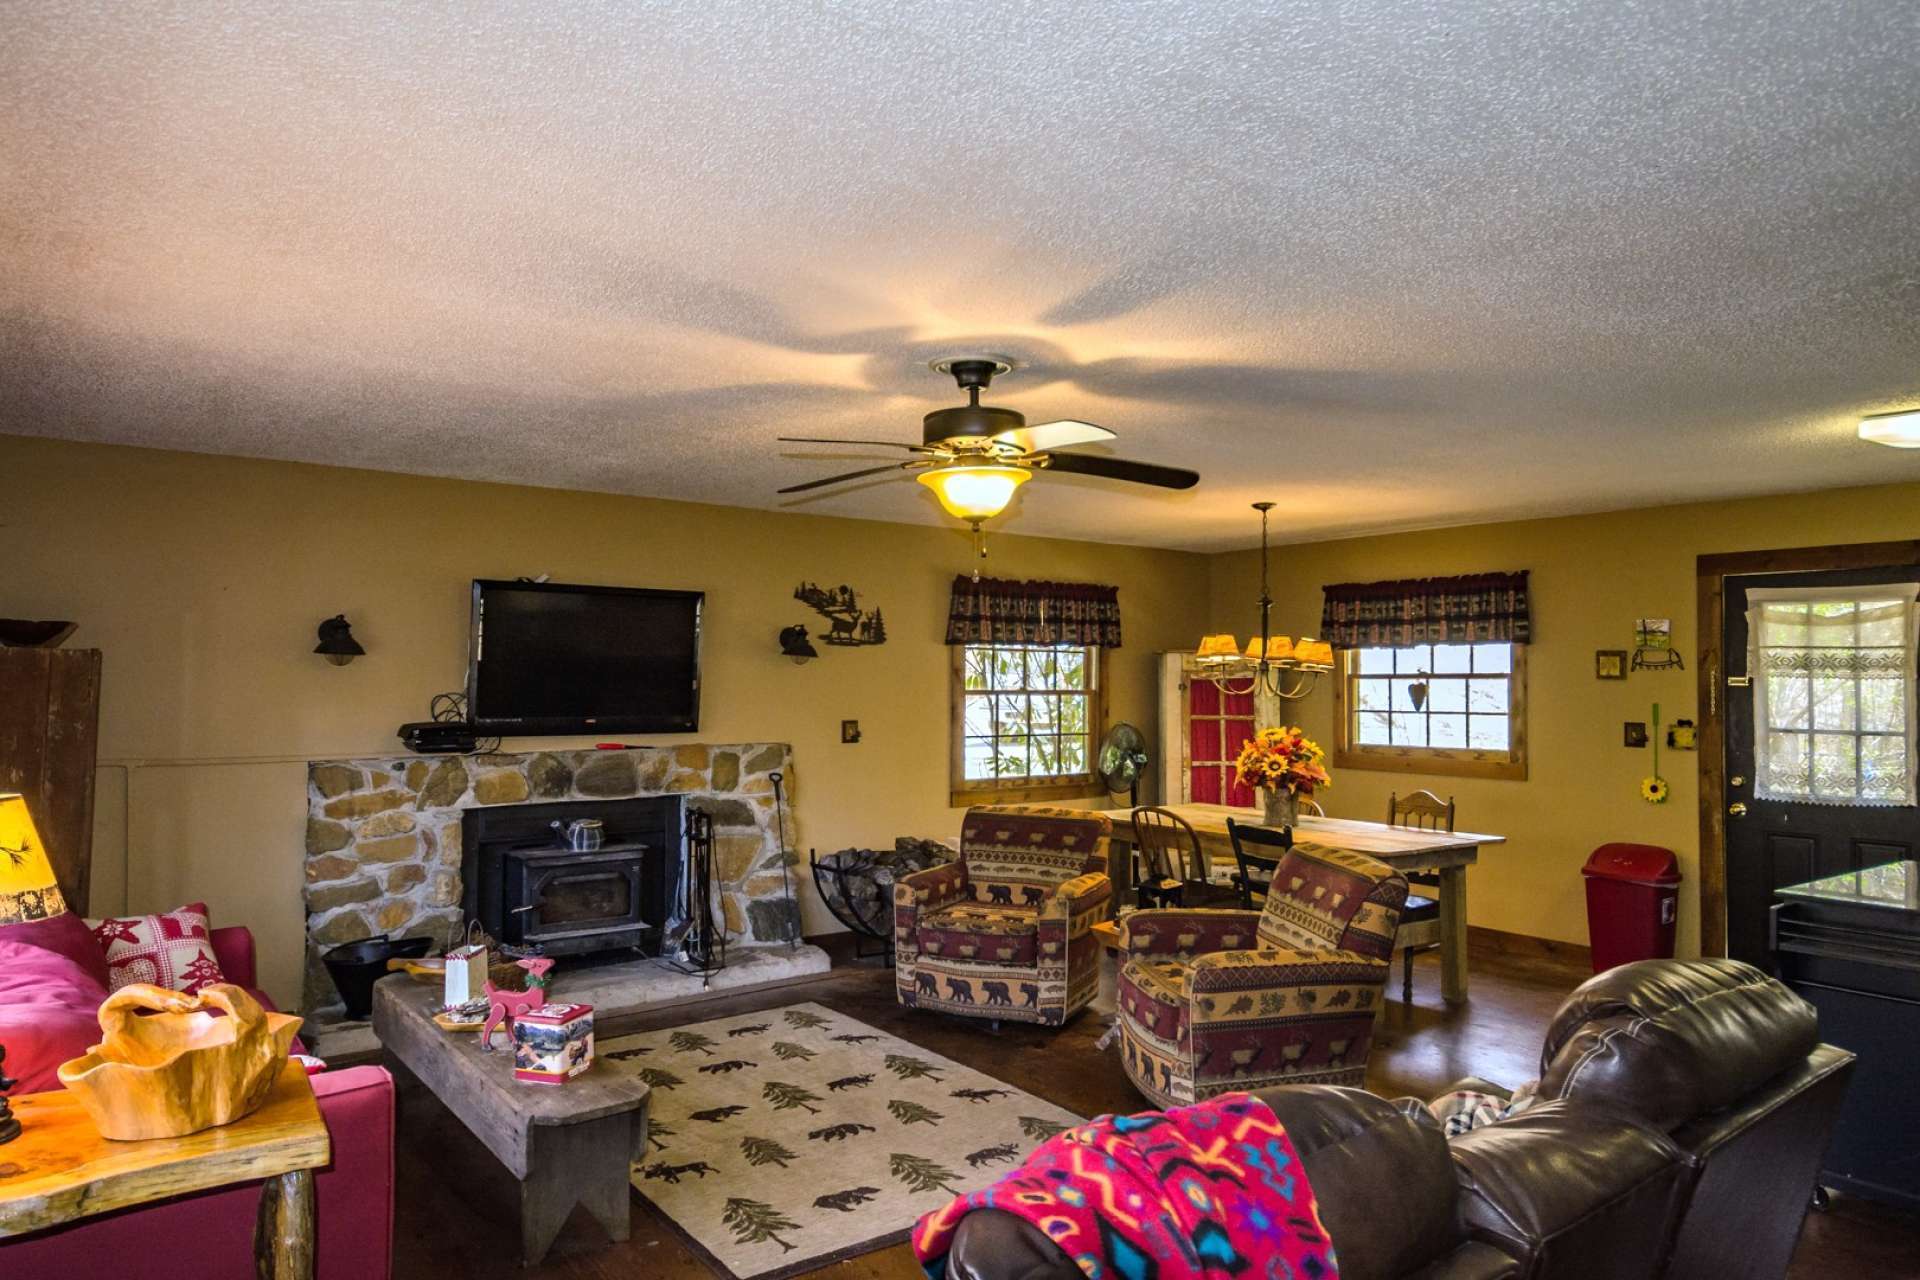 The living area features a stone fireplace with a wood burning stove insert to keep the cabin warm and cozy.